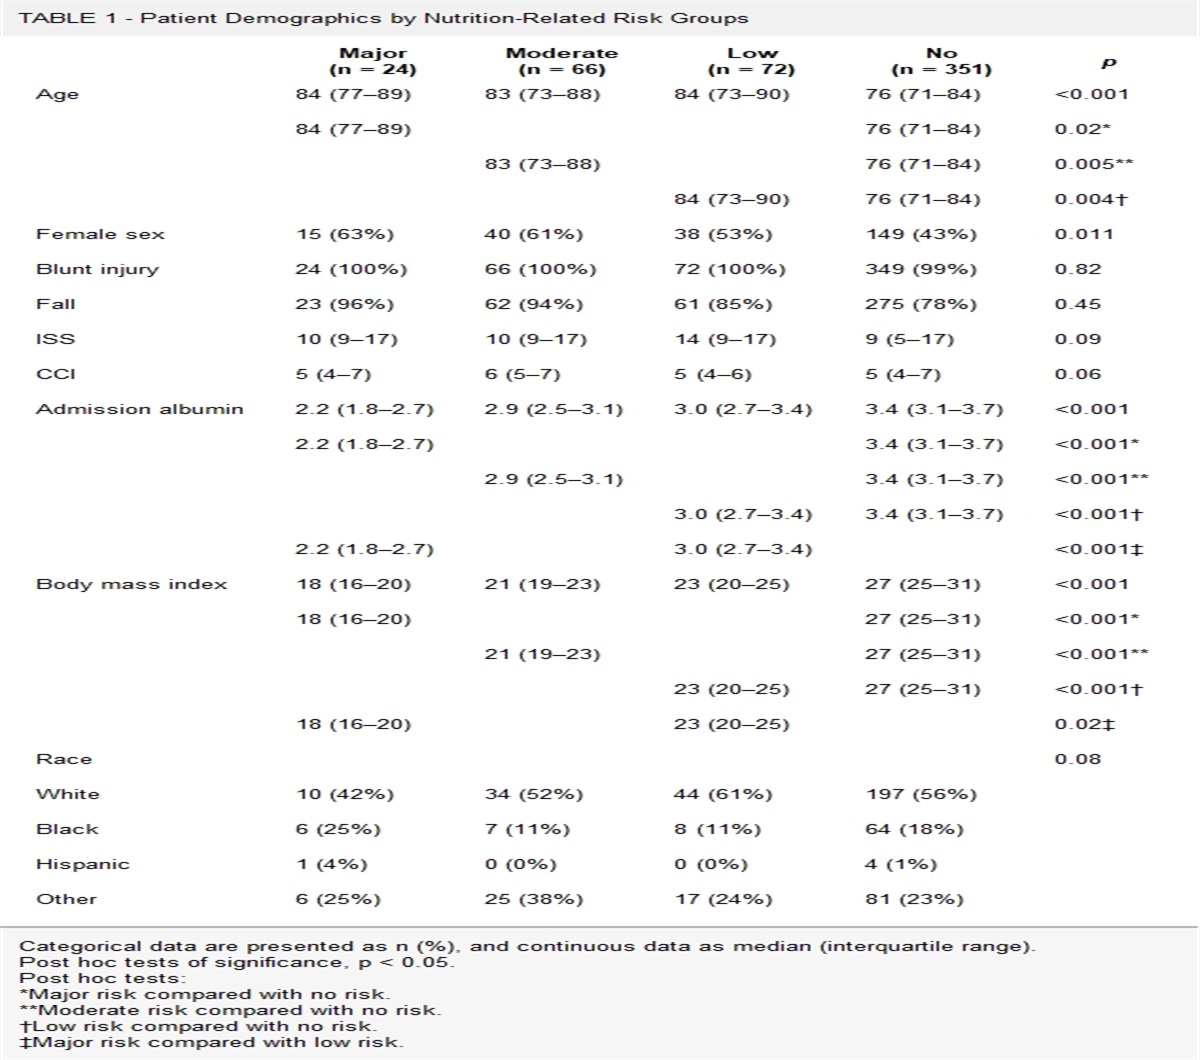 The Geriatric Nutritional Risk Index as a predictor of complications in geriatric trauma patients